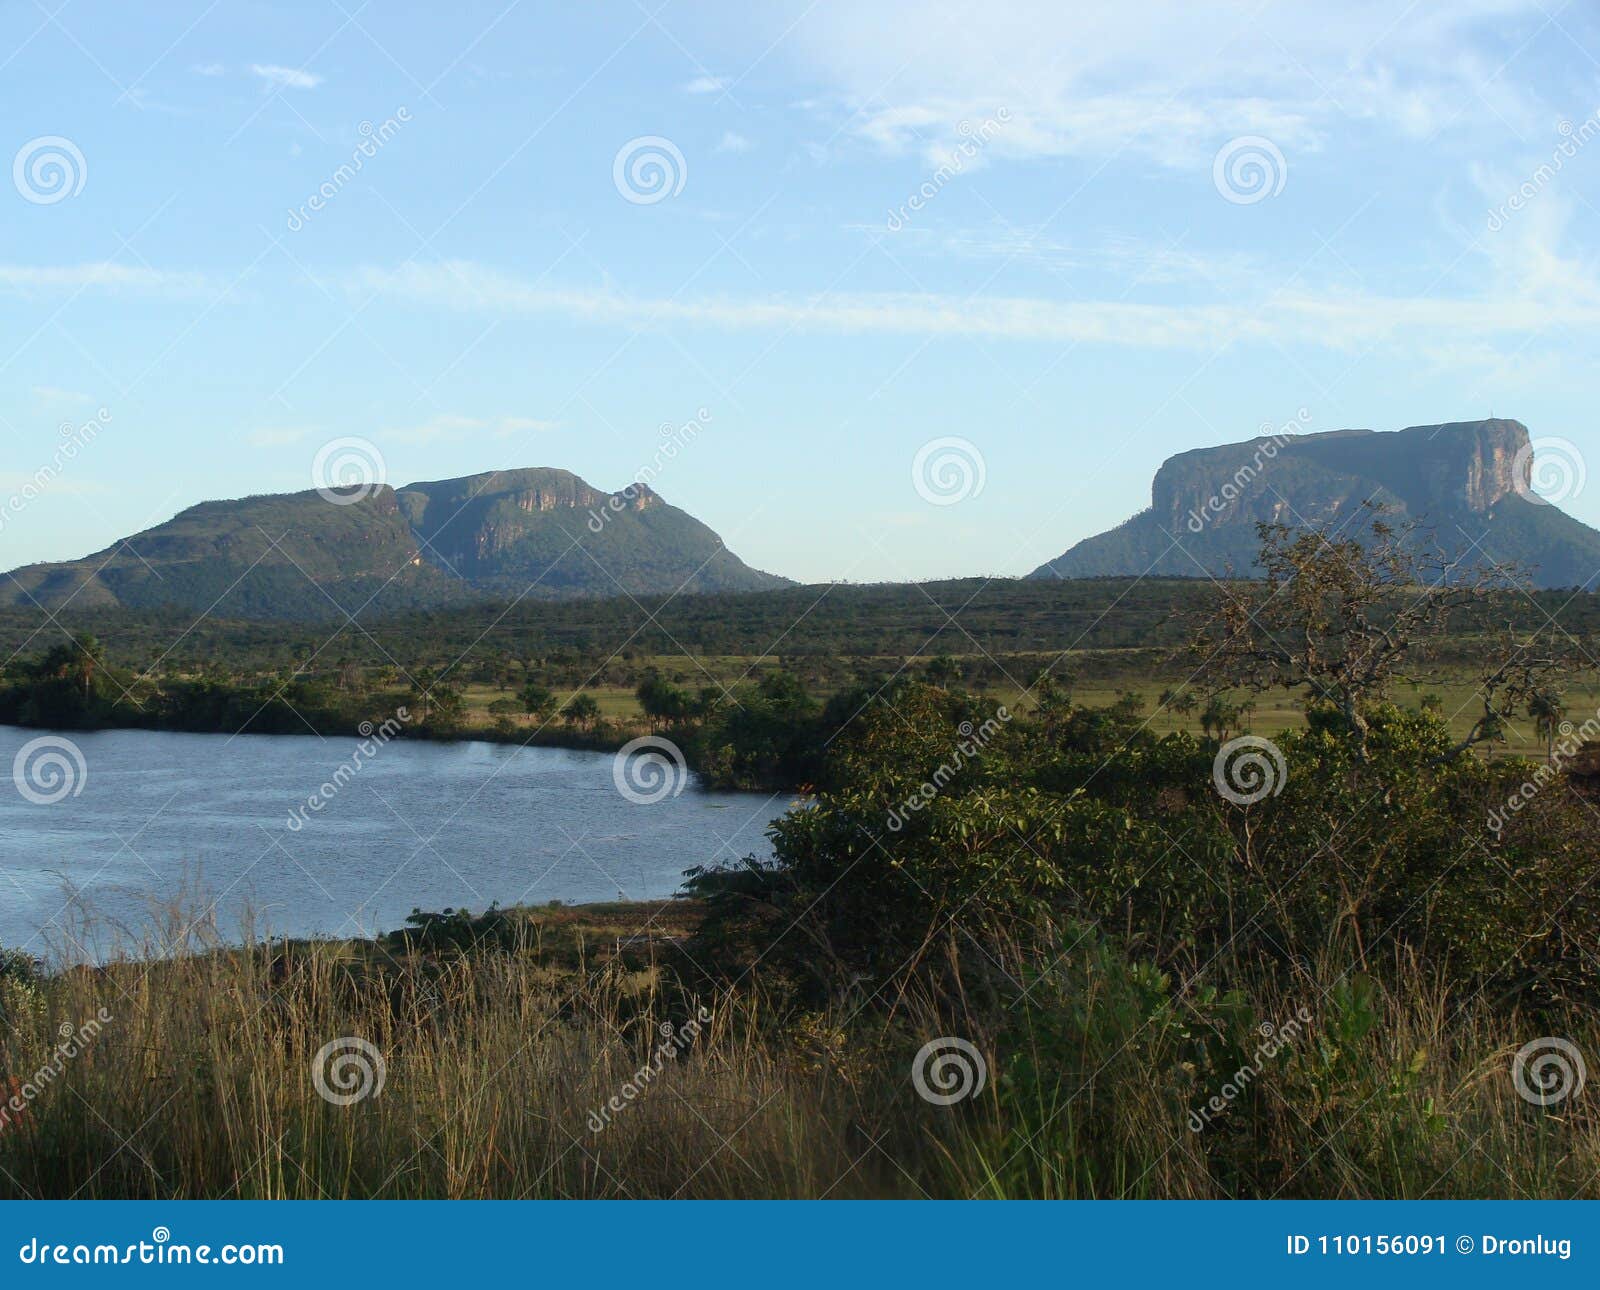 Savanna, river and tepuy In Venezuelan Amazon. Horizontal photograph of the savanna, river and tepuy covered by the blue sky and surrounded by vegetation